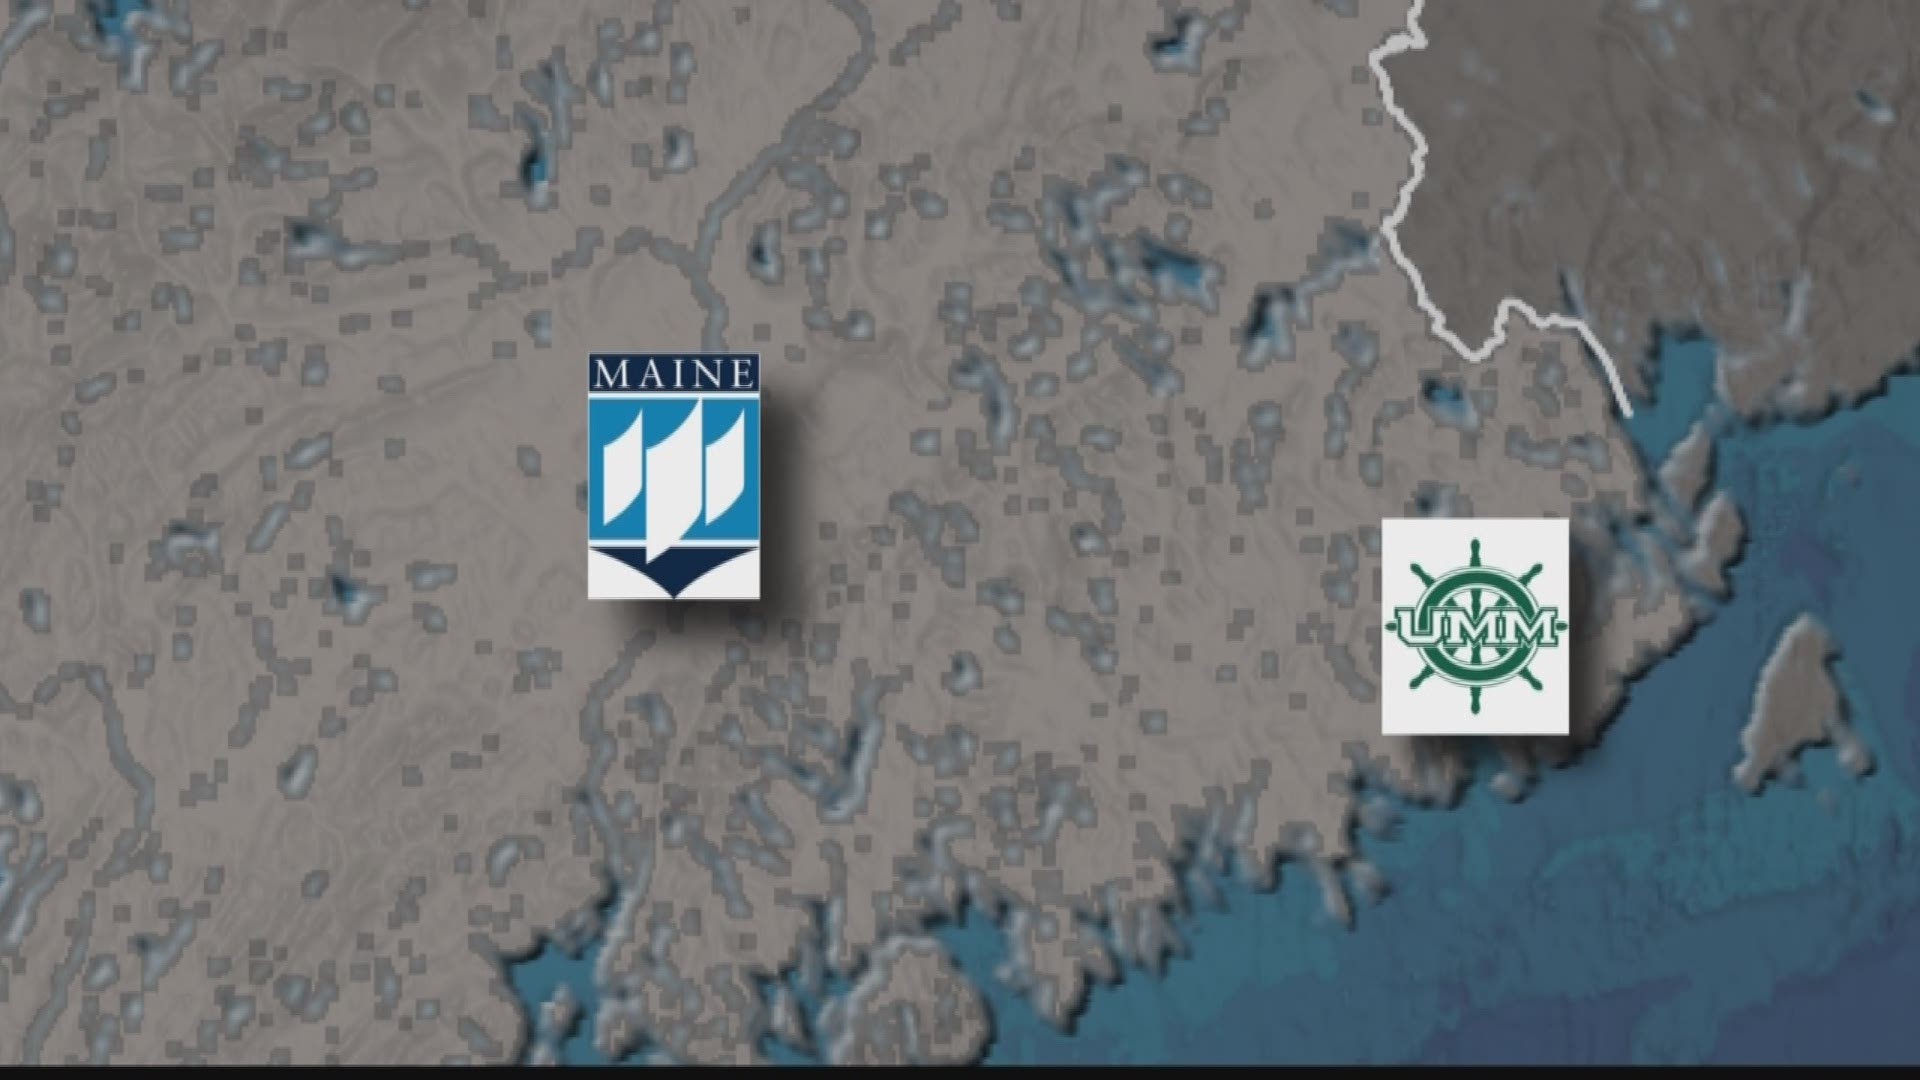 Changes could be coming to UMaine system.